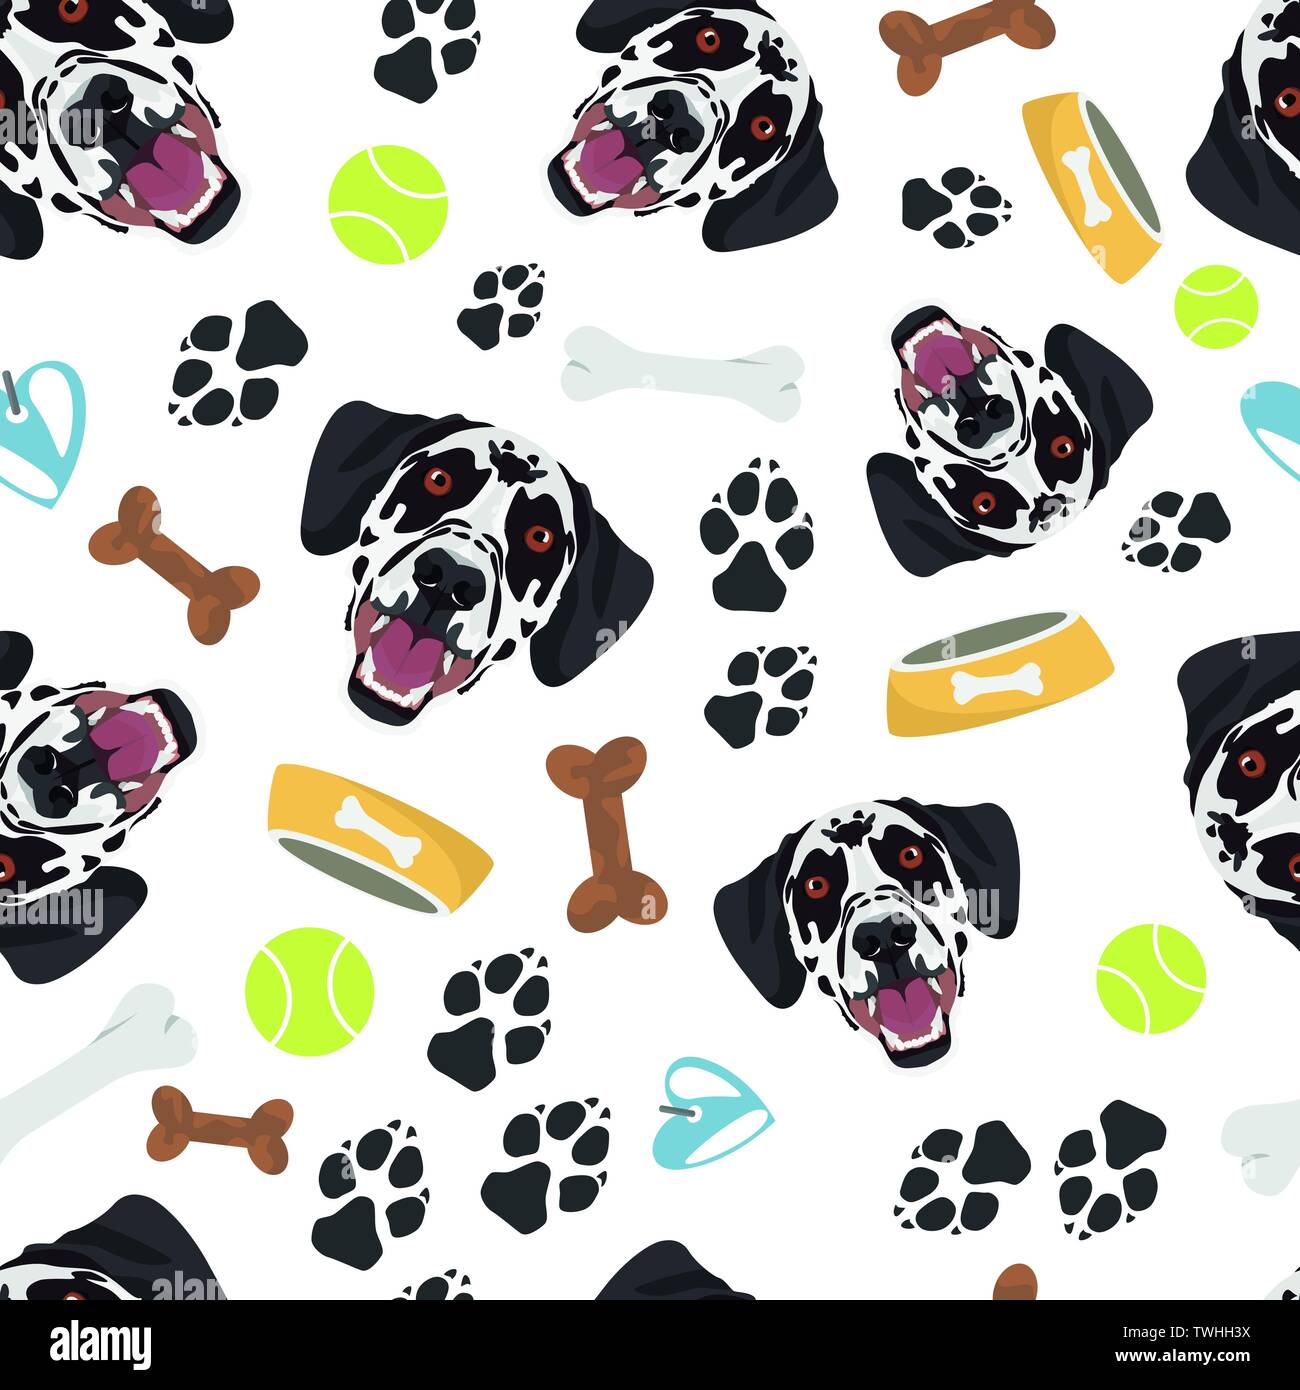 Smiling Dog Dalmatian - Seamless pattern with playful illustration of a dog and paw prints. The smiling dog is a great gift for dog owners. Stock Vector